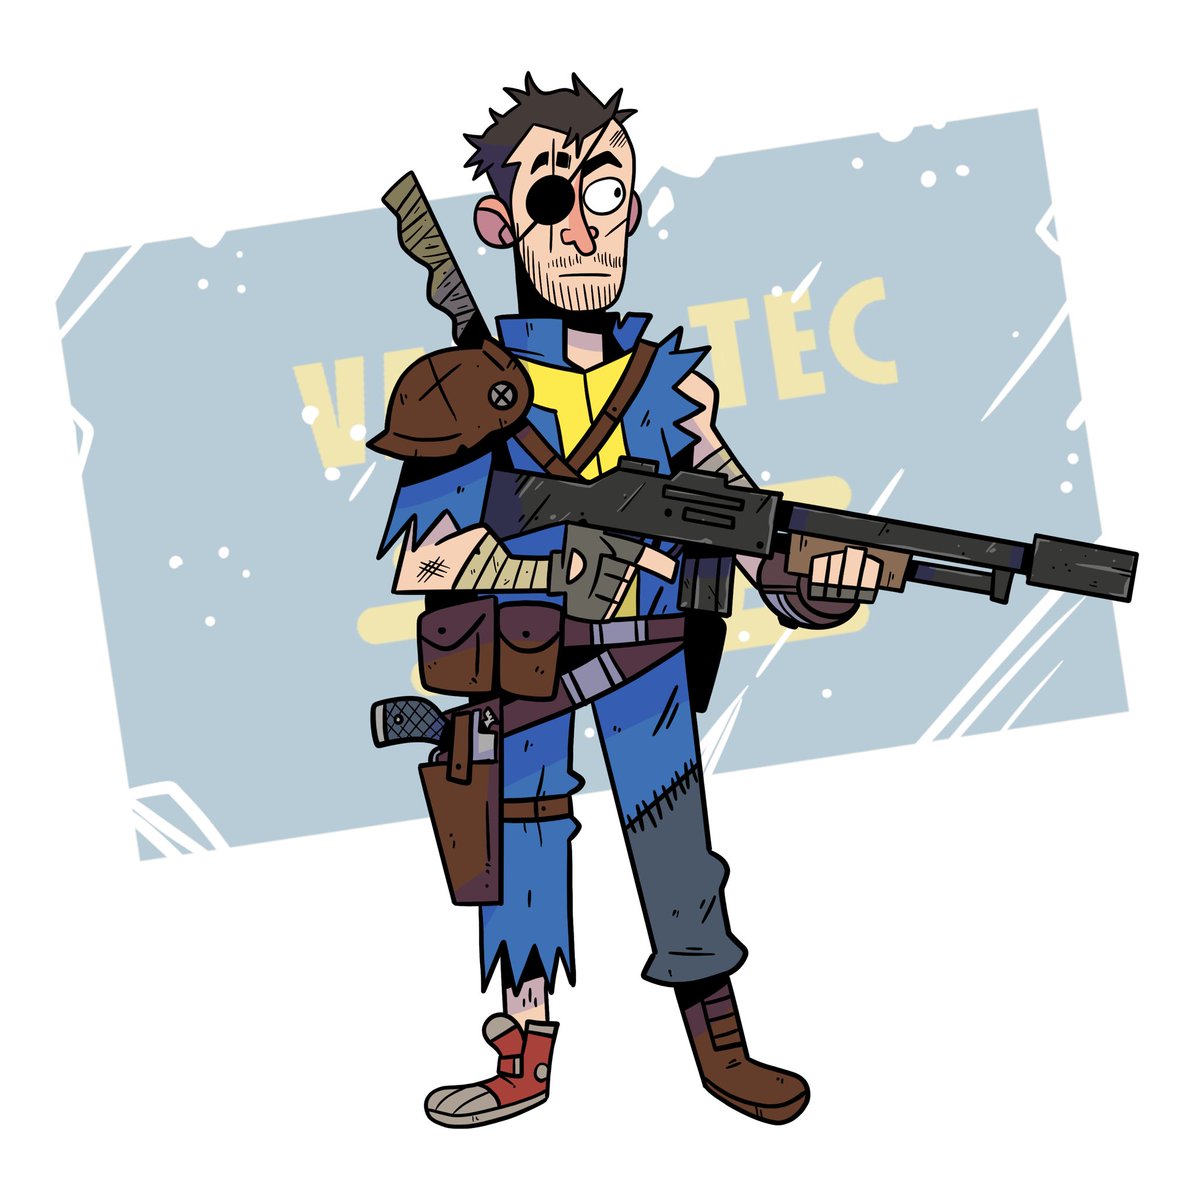 Fallout Character packages now available! Only 4 spots open! #fallout